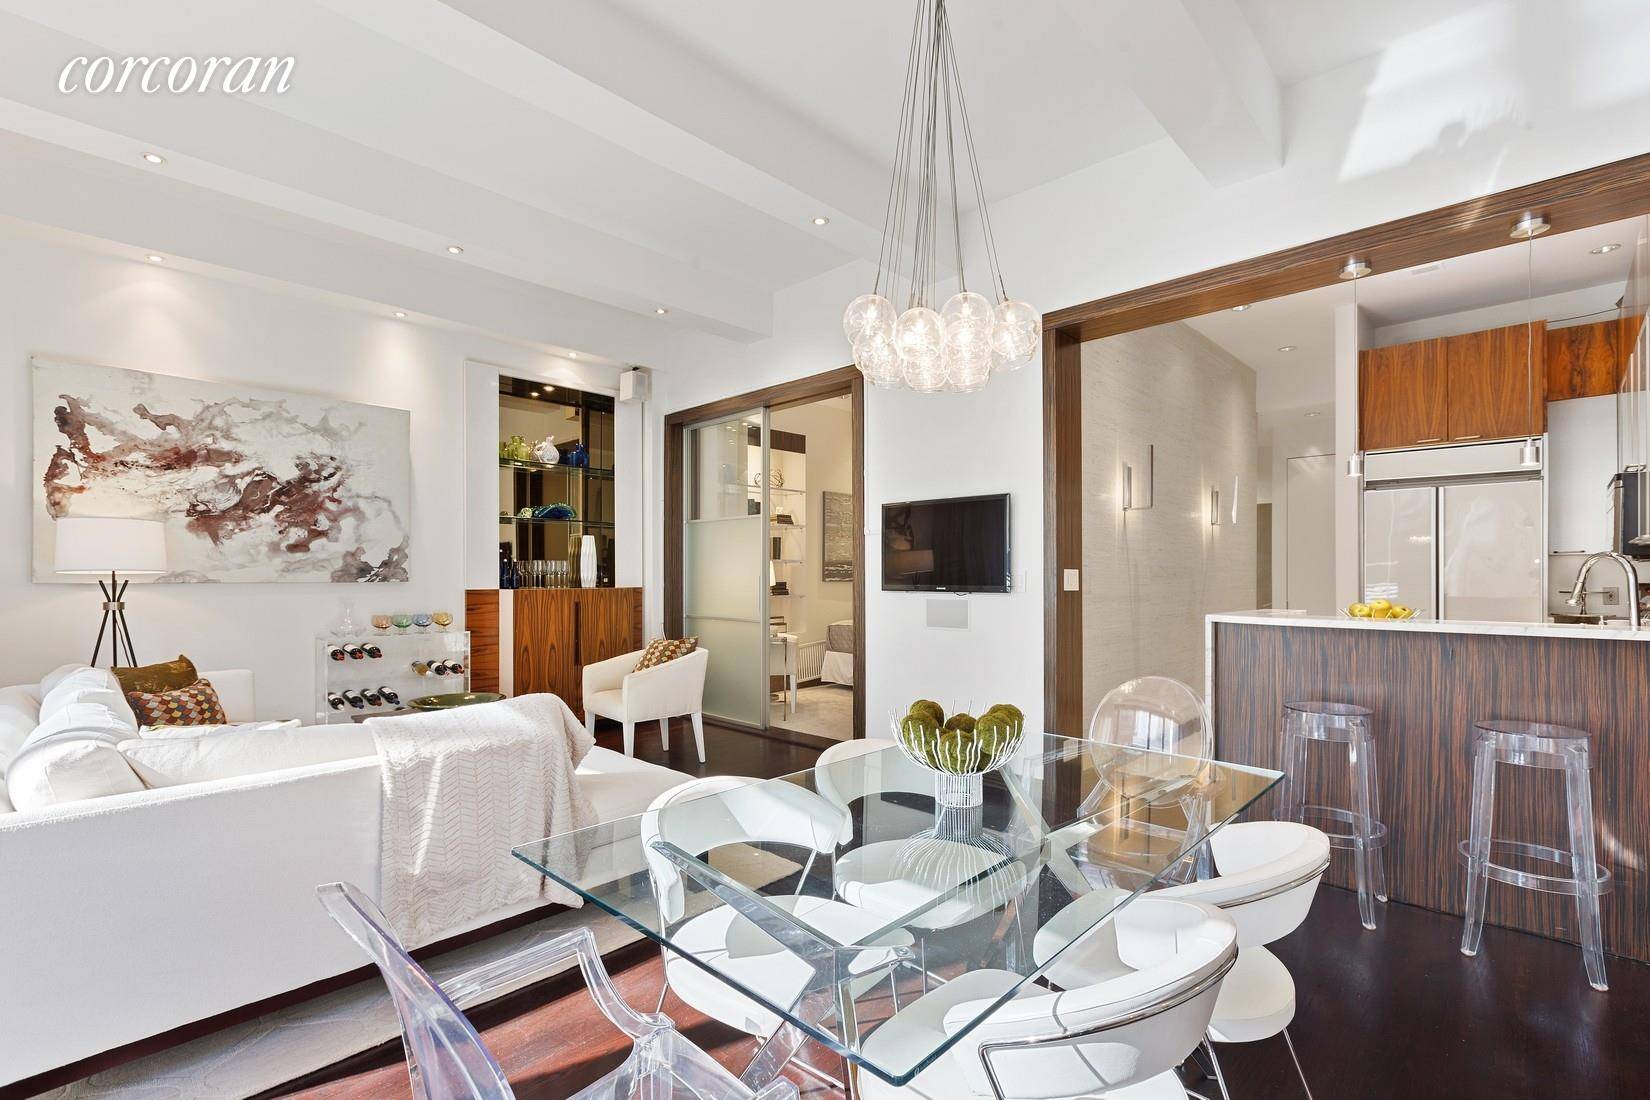 Apartment 4F is a sunny, beautifully designed prewar loft with 11 foot beamed ceilings and huge over sized windows.